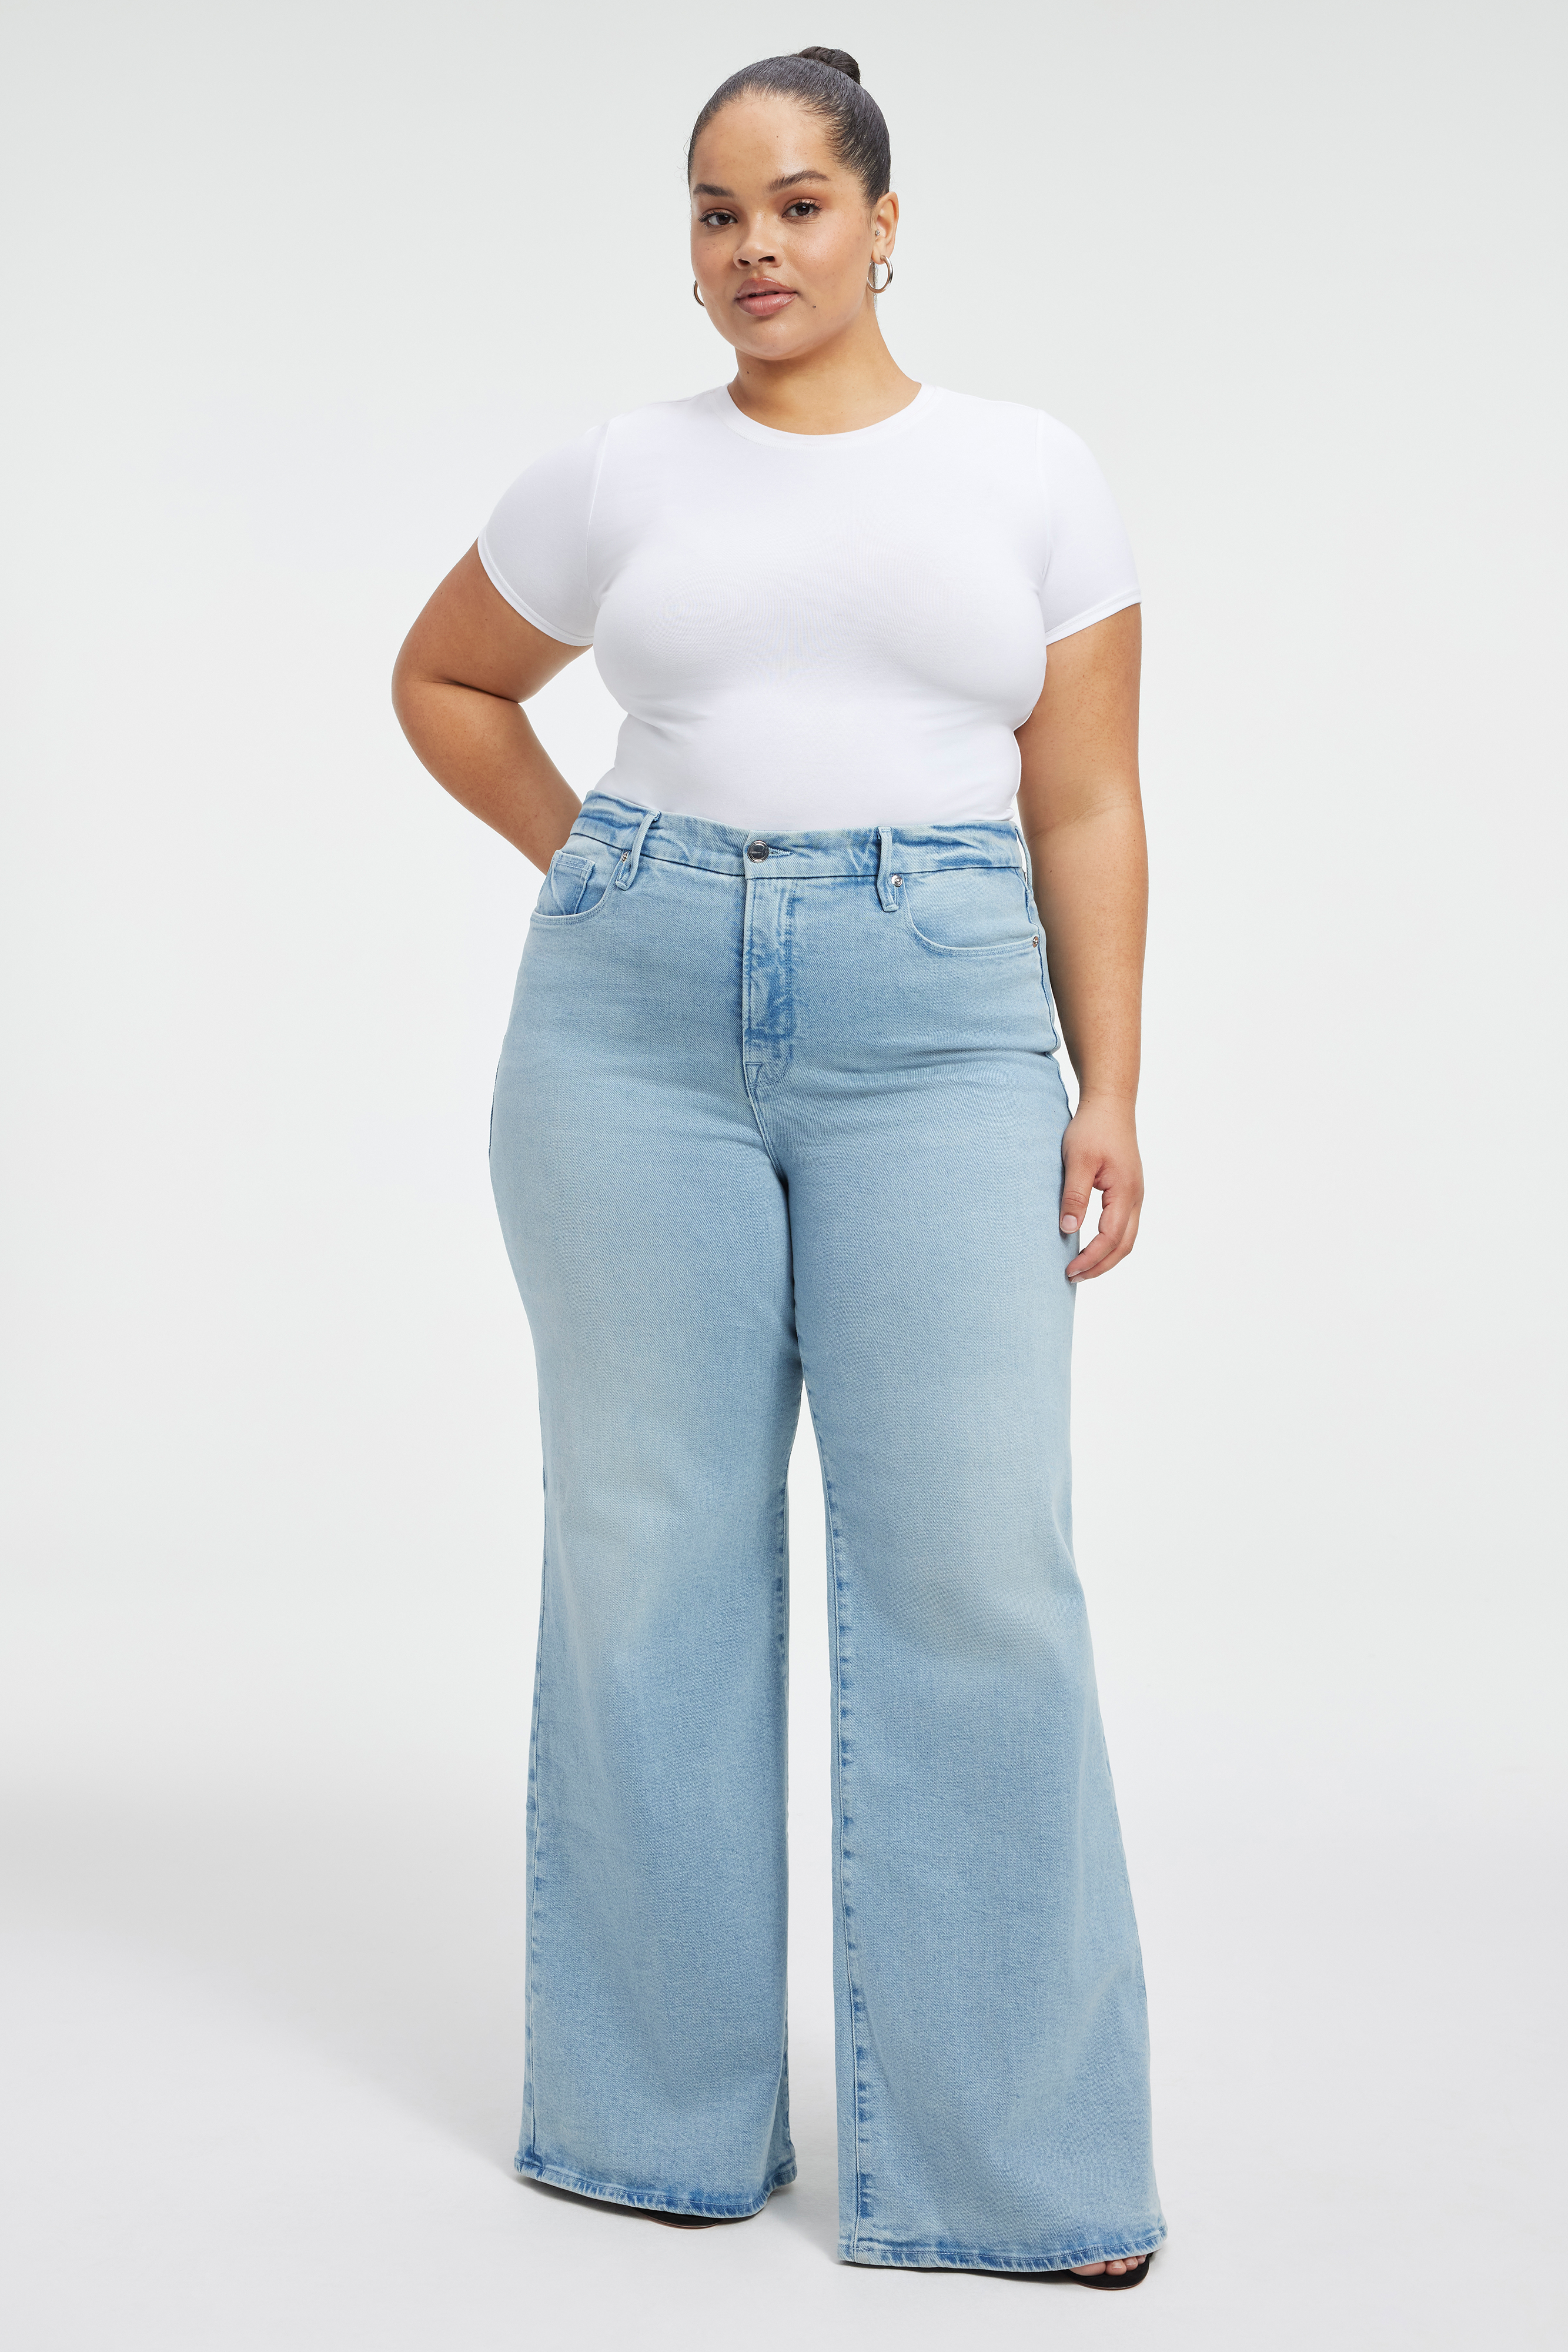 Styled with GOOD WAIST PALAZZO JEANS | BLUE452